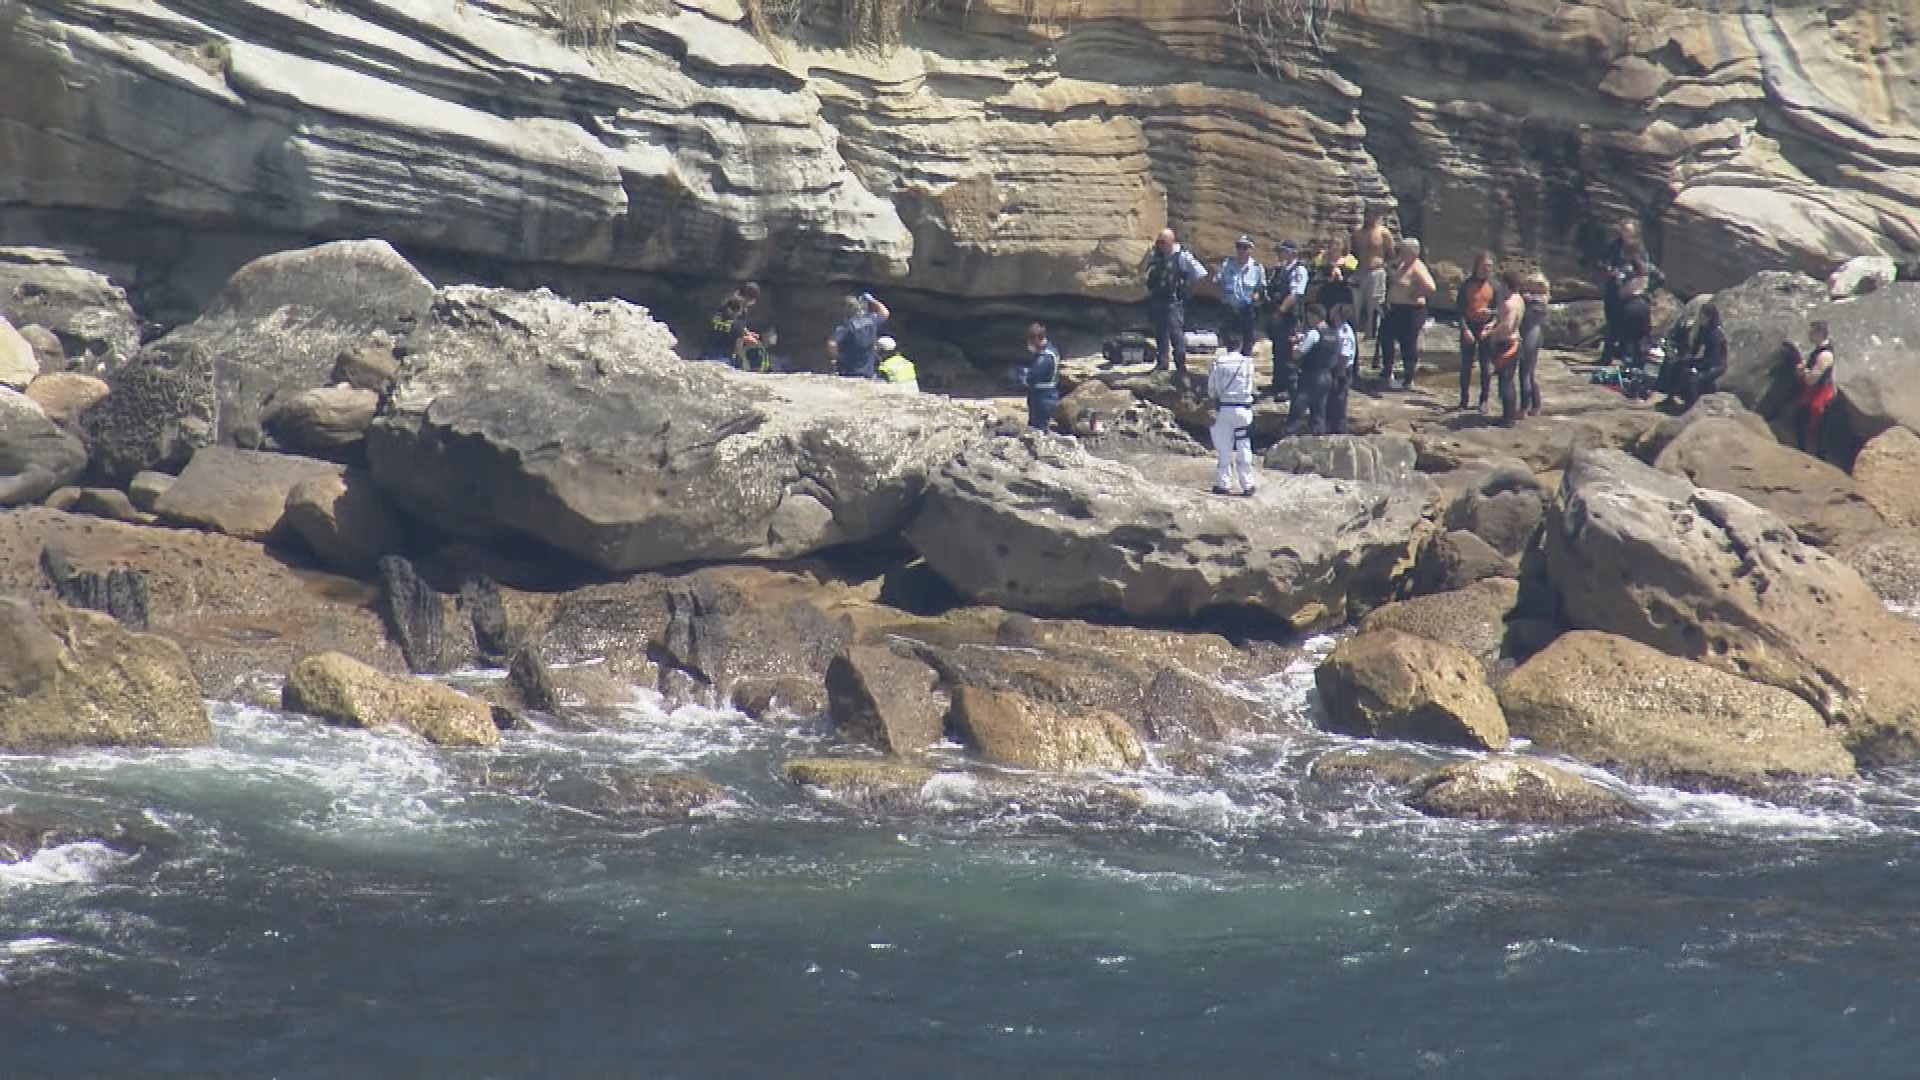 A man has died while scuba diving in Sydney's south today.